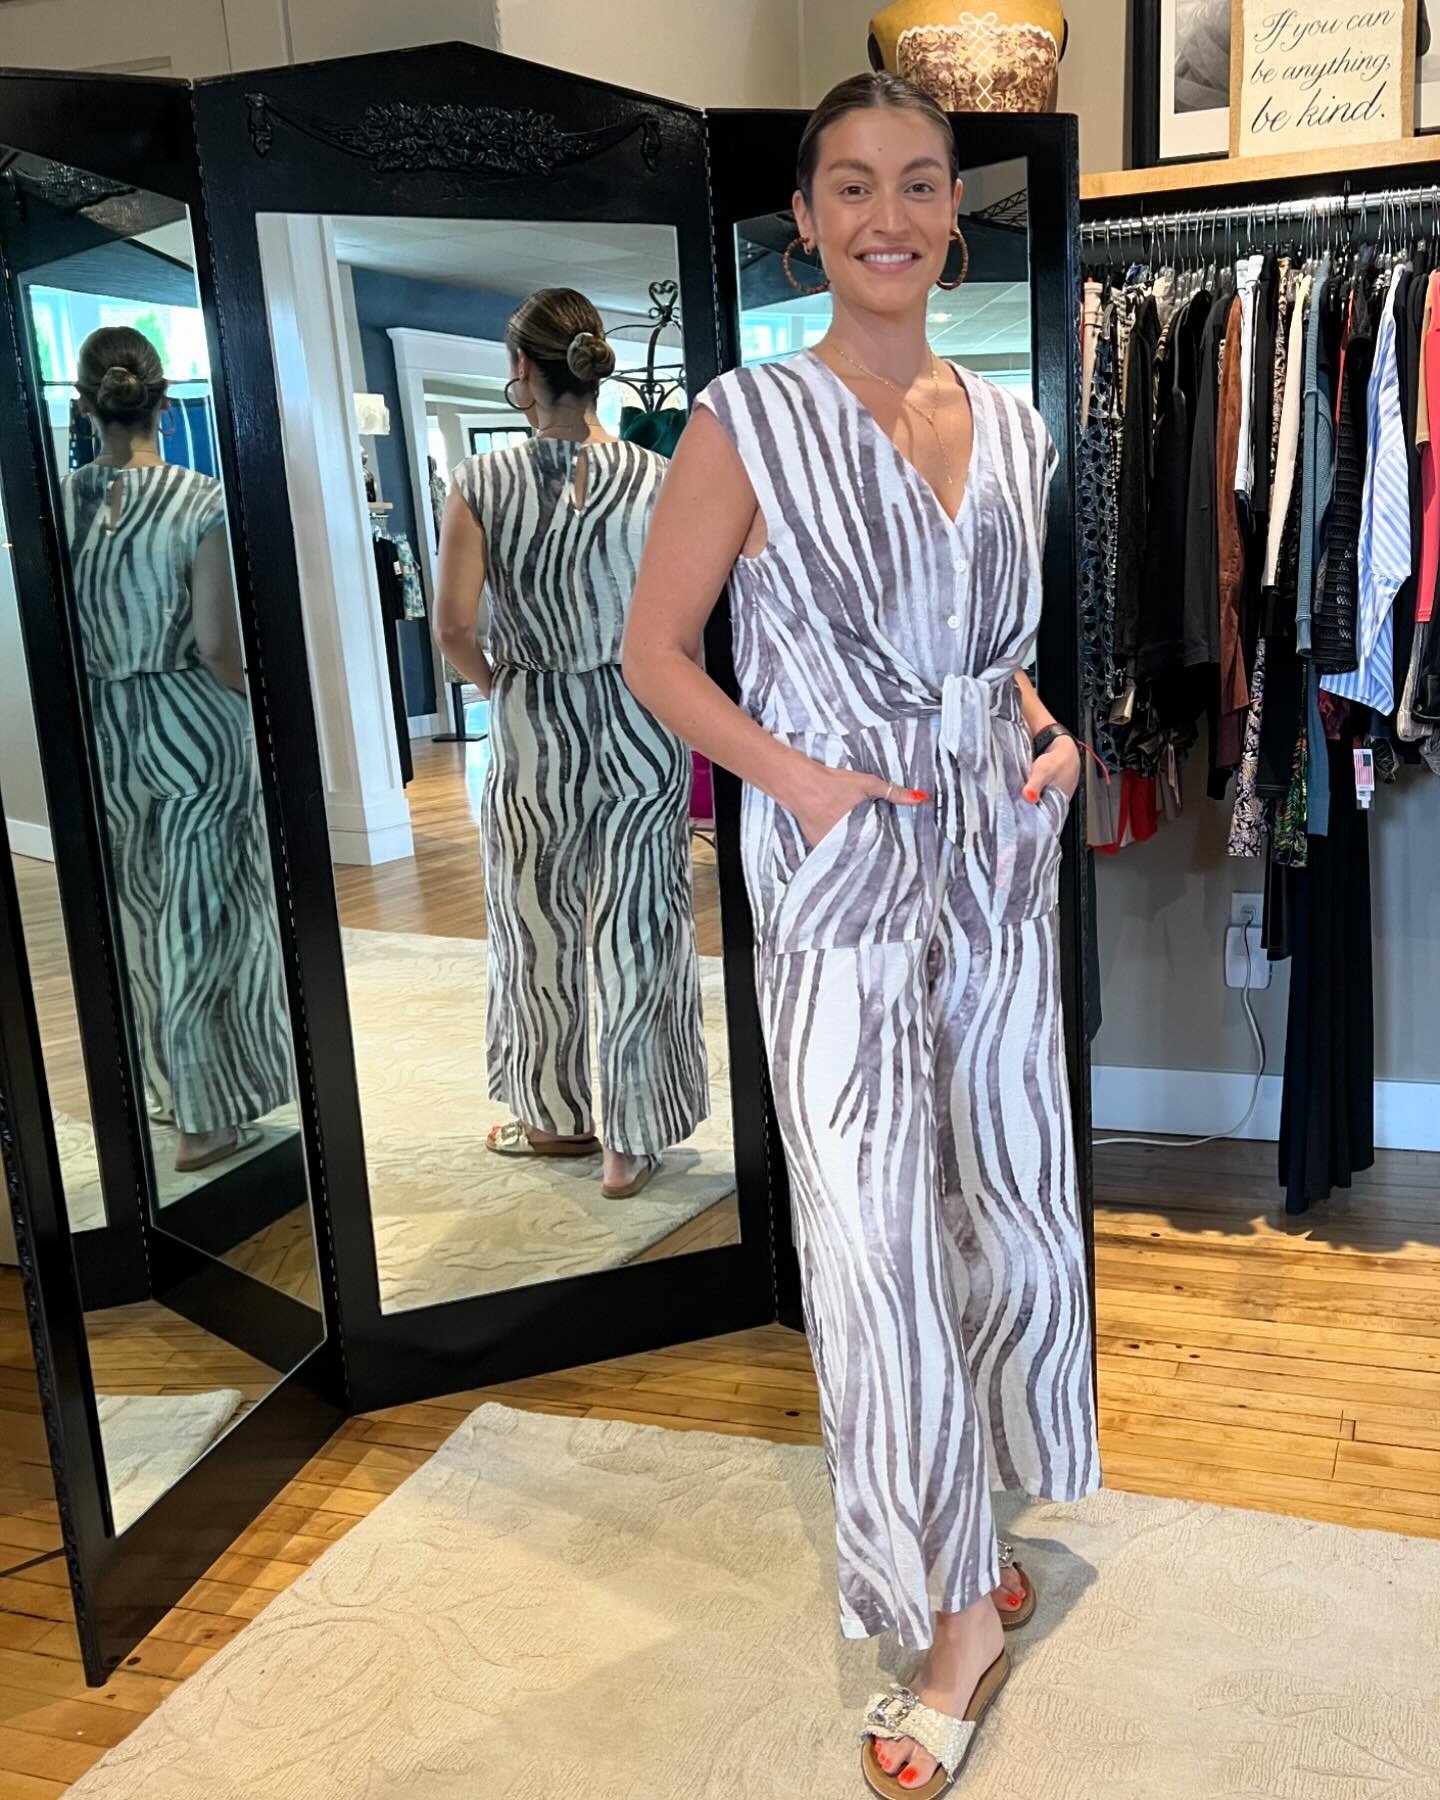 Look 👀 at this fabulous jumpsuit from Picadilly! The grey and white stripped pattern, front tie, and lightweight fabric make this a beautiful choice for lots summer occasions! 
.
.
#shopsimplyjhershey #hersheypa #harrisburgpa #lancasterpa #camphillp